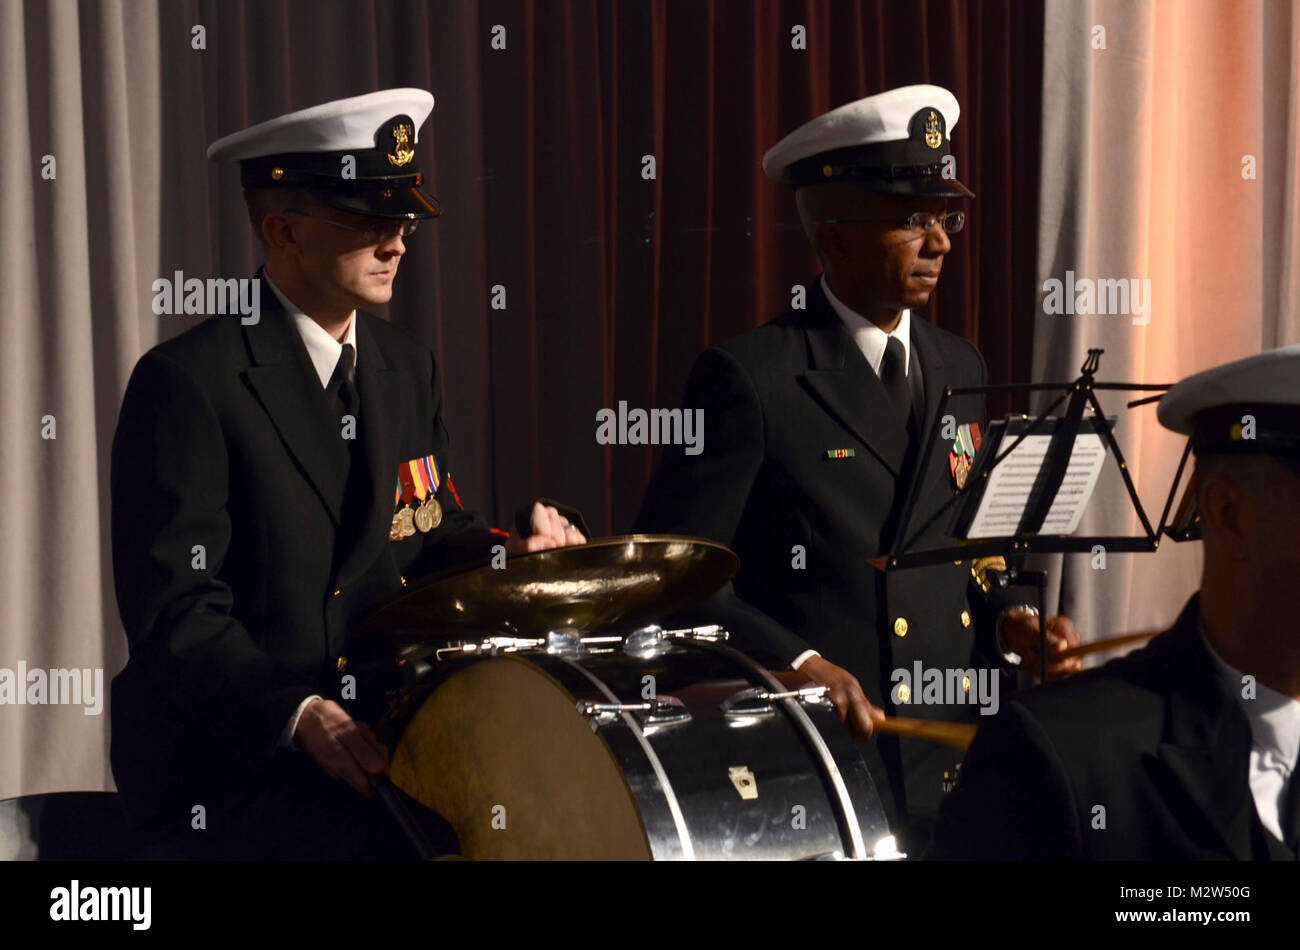 120222-N-HG258-060 WASHINGTON, D.C. (February 22, 2012) Musician 1st Class Randy Johnson, left and Chief Musician Stacy Loggins of the U.S. Navy Ceremonial Band perform preliminary patriotic music at the opening of the Groundbreaking Ceremony of the Smithsonian's African-American Museum of History and Culture. The ceremony was emceed by actress and singer Phylicia Rashad and featured remarks by former First Lady Laura Bush and President Barack Obama. The event featured music by opra singer Denyce Graves and the Navy Band. The Museum is the only national museum devoted exclusively to the docume Stock Photo